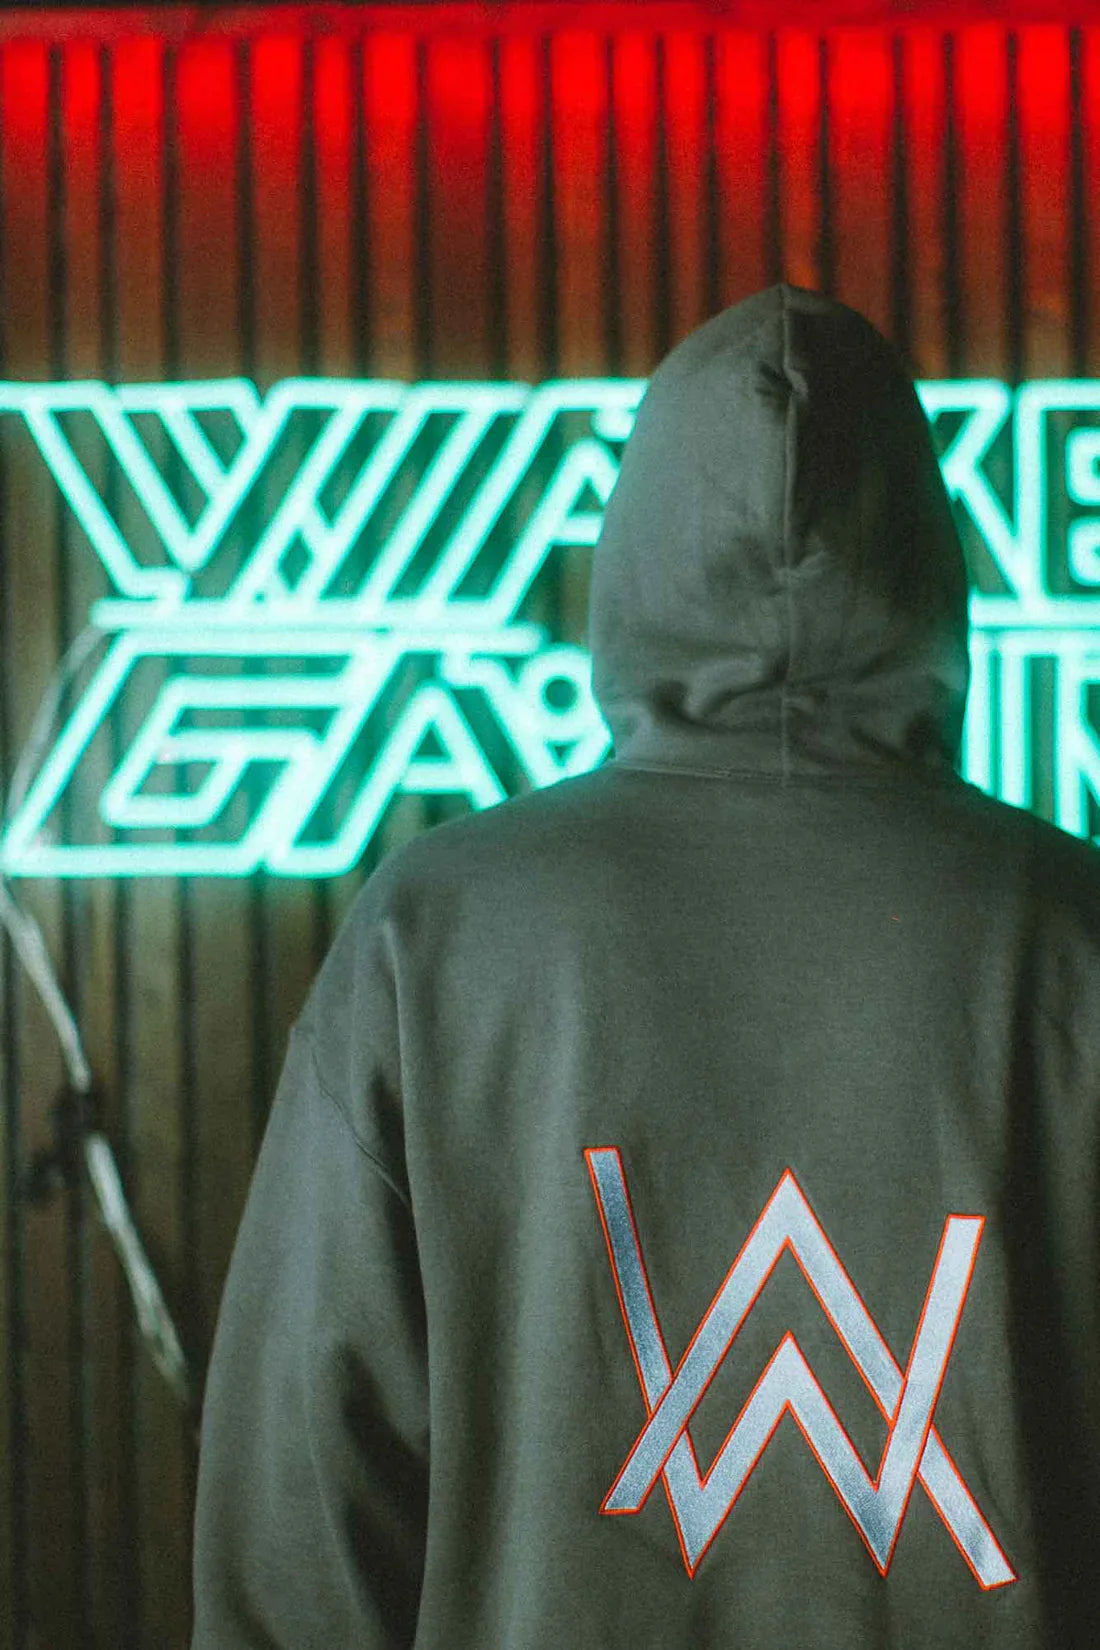 Back view of a person in a gray Alan Walkre Gaming Hoodie under neon lights, the Alan Walker logo radiating a cyberpunk vibe in the urban night.